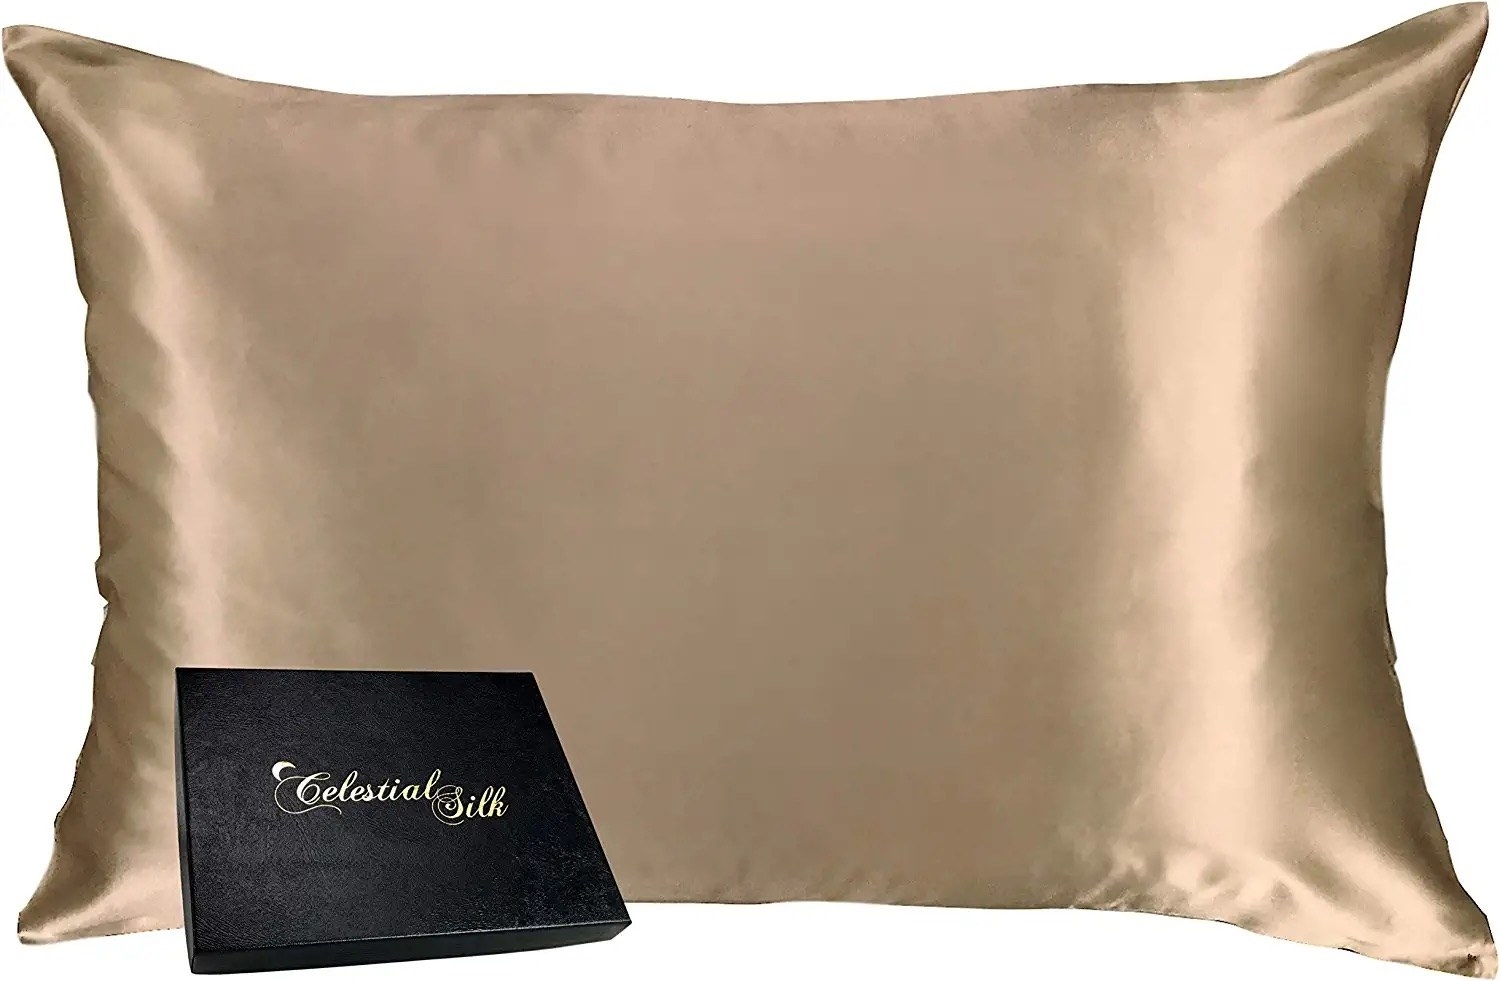 A pillow with a champagne colored silk pillowcase and a small box